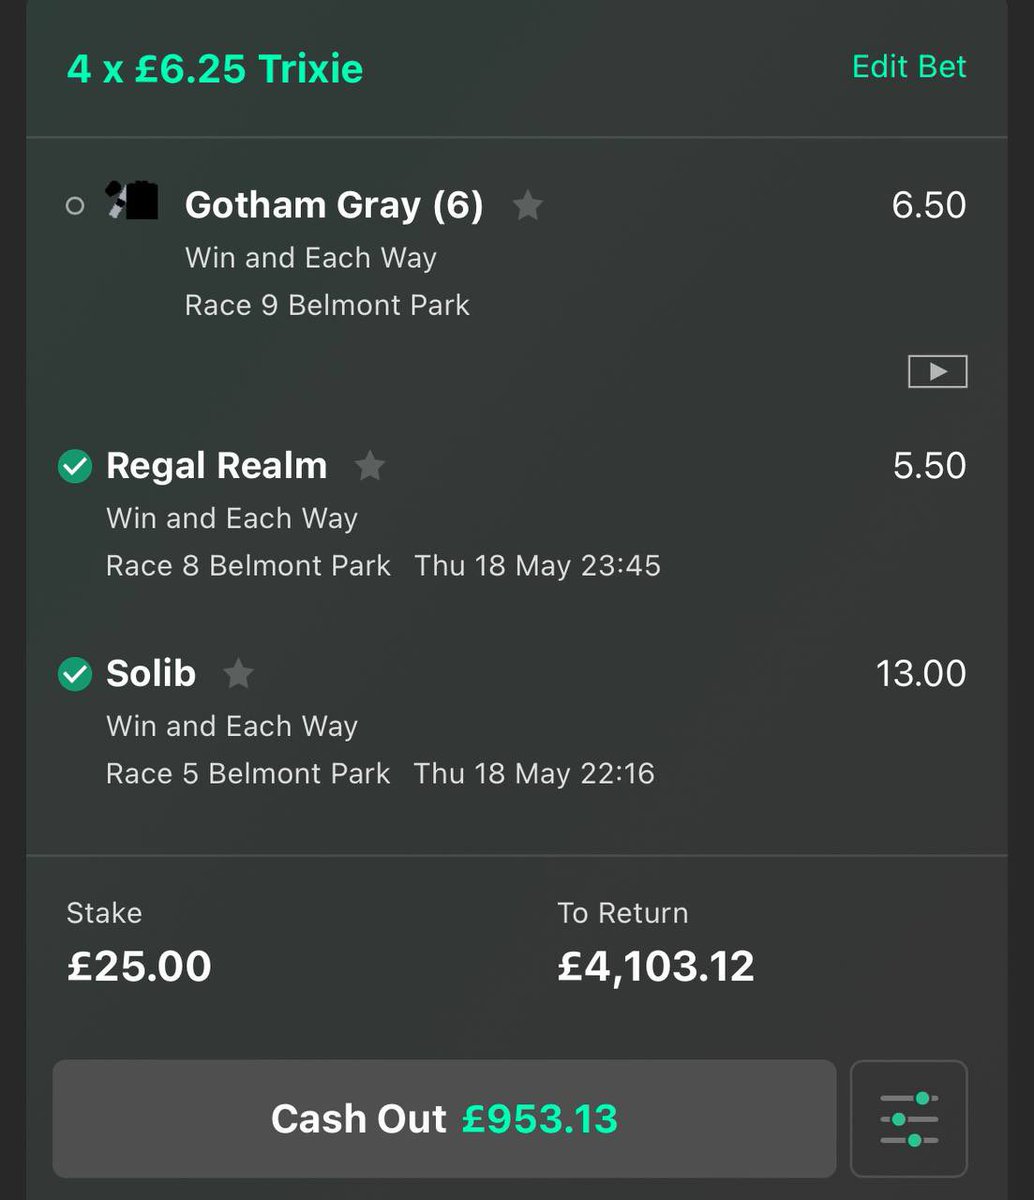 Fine lines.. last night! but HUGE PROFIT, a nose away from 600/1 trixie .. no one does it better!! Don’t miss the next one being posted 👇 t.me/+2d-mSEM04-9iM… £50 to one follower who 1. Likes & retweets 2. Be in the horse channel - t.me/+2d-mSEM04-9iM…